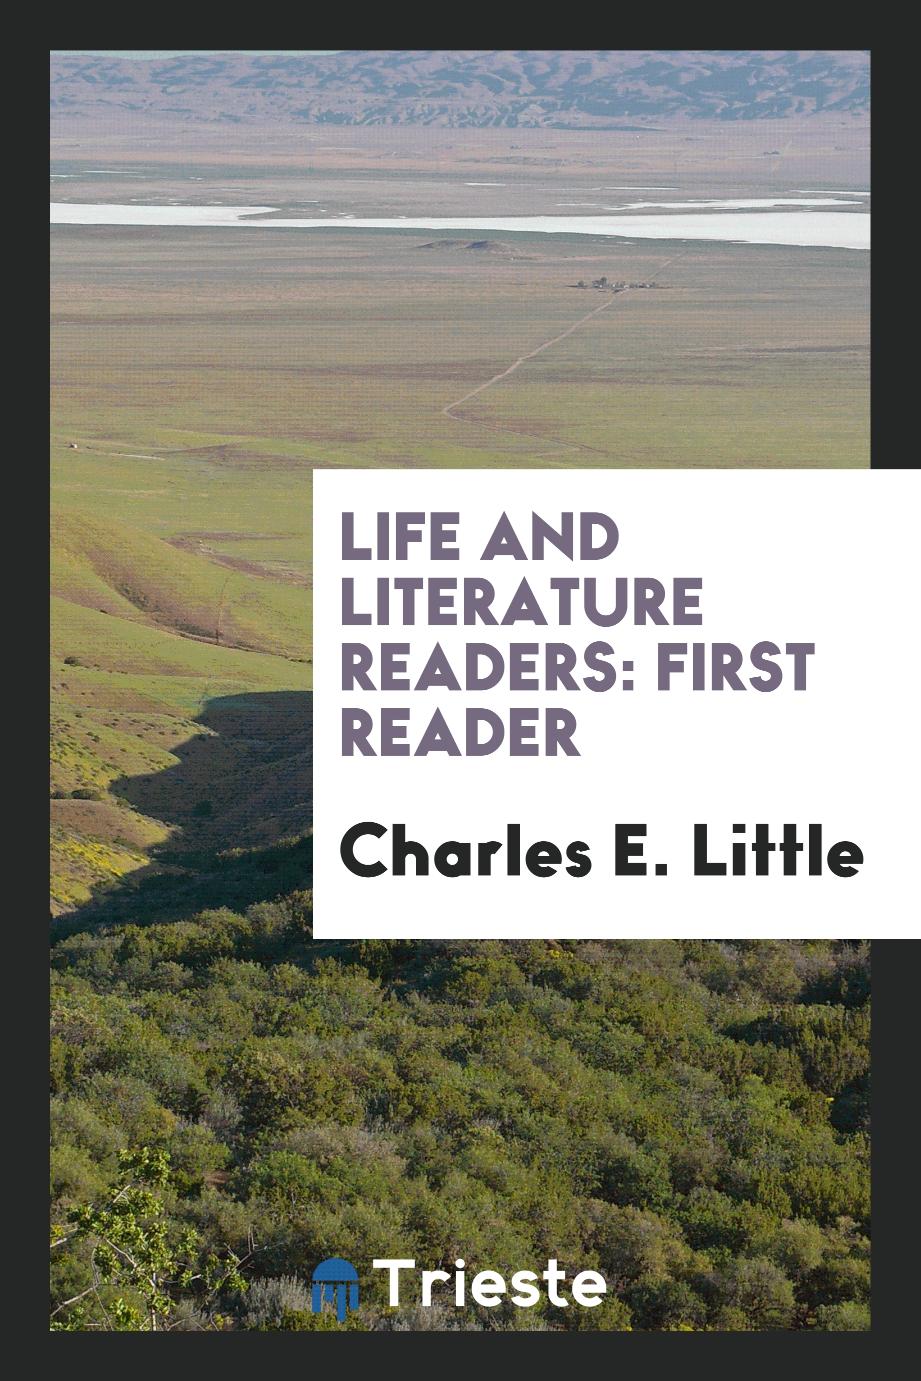 Life and Literature Readers: First Reader